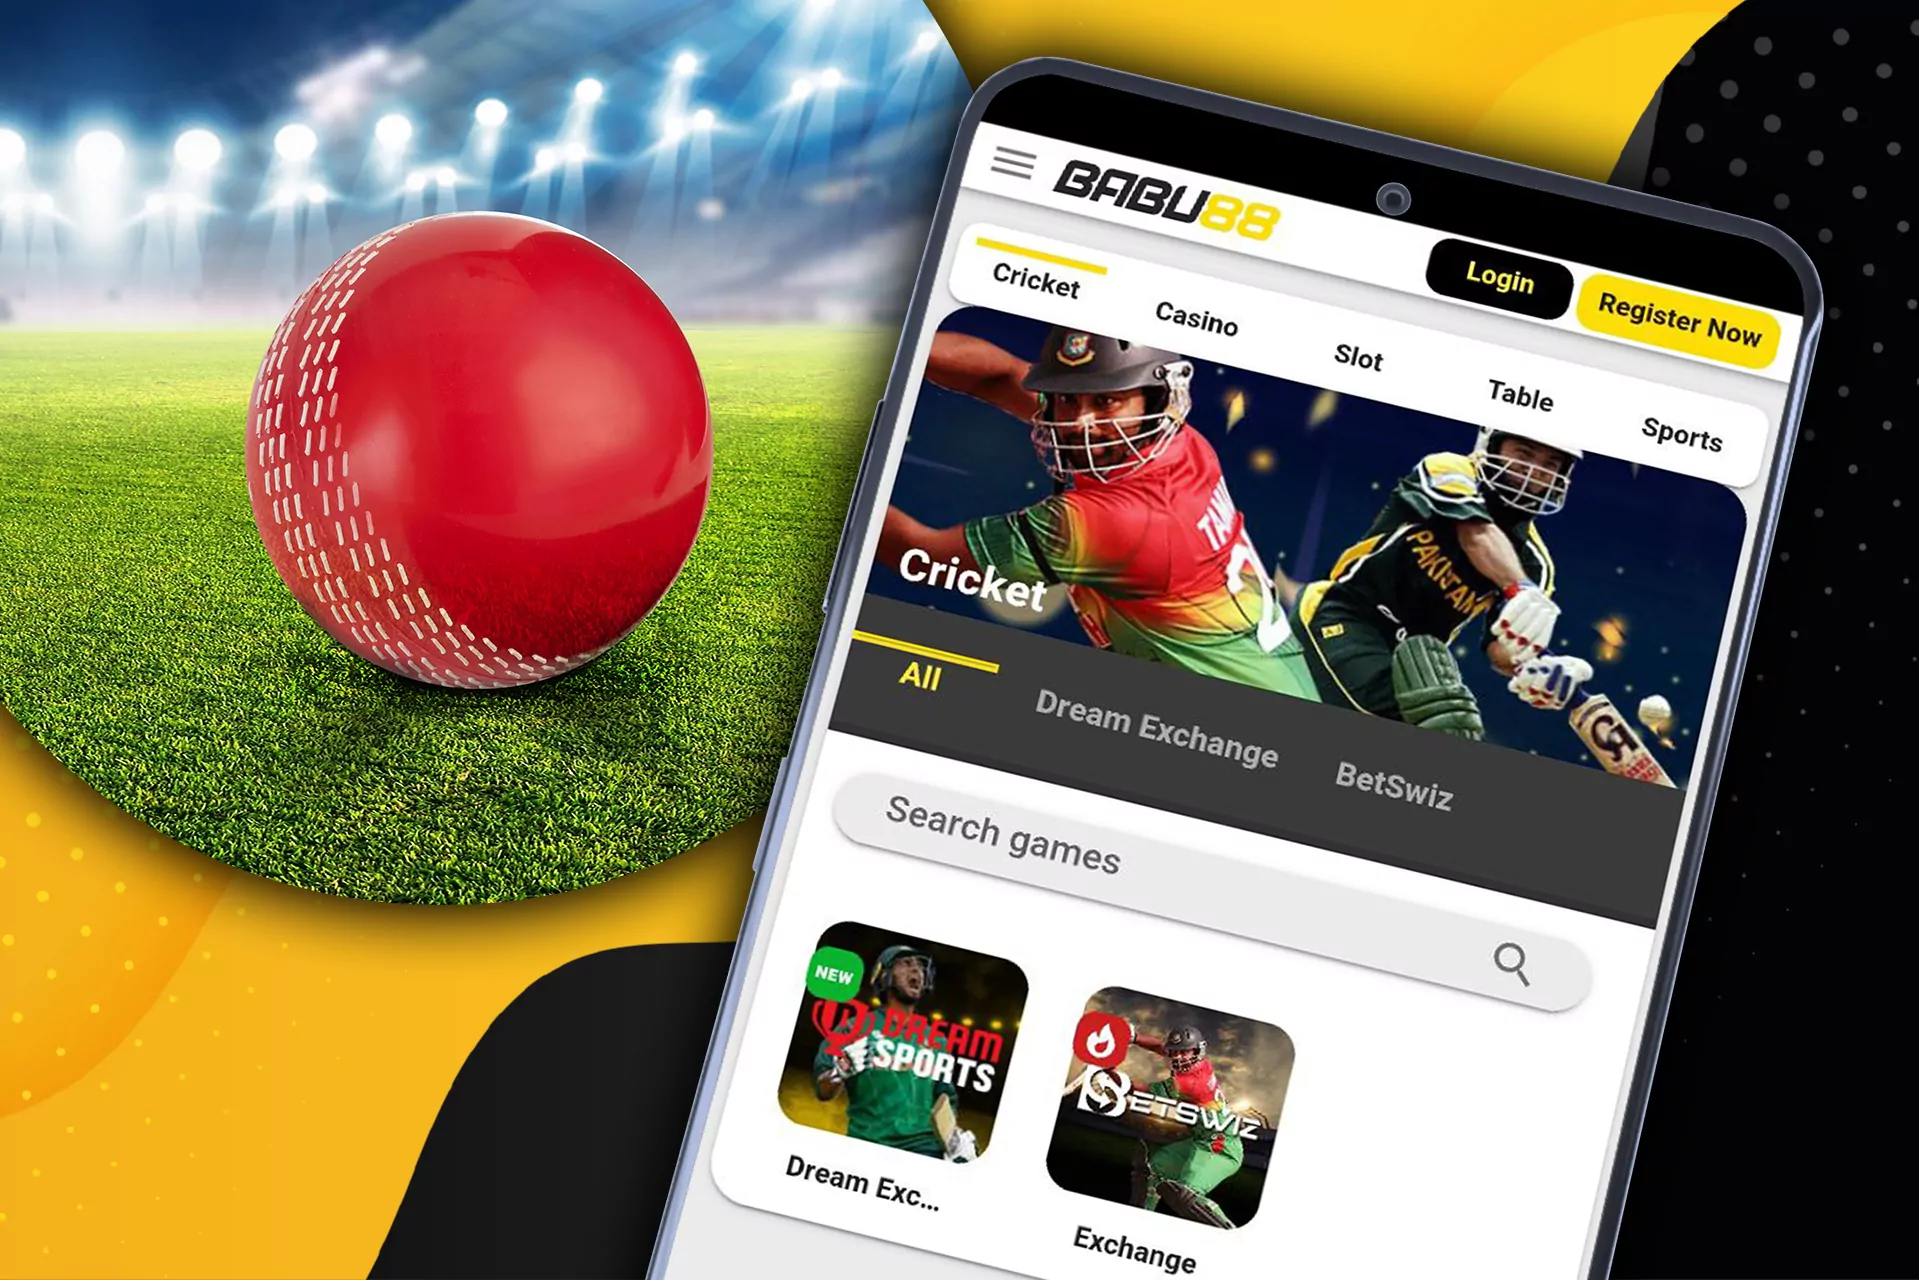 Place bets on your favorite team at cricket IPL via your Babu88 mobile app at any place.